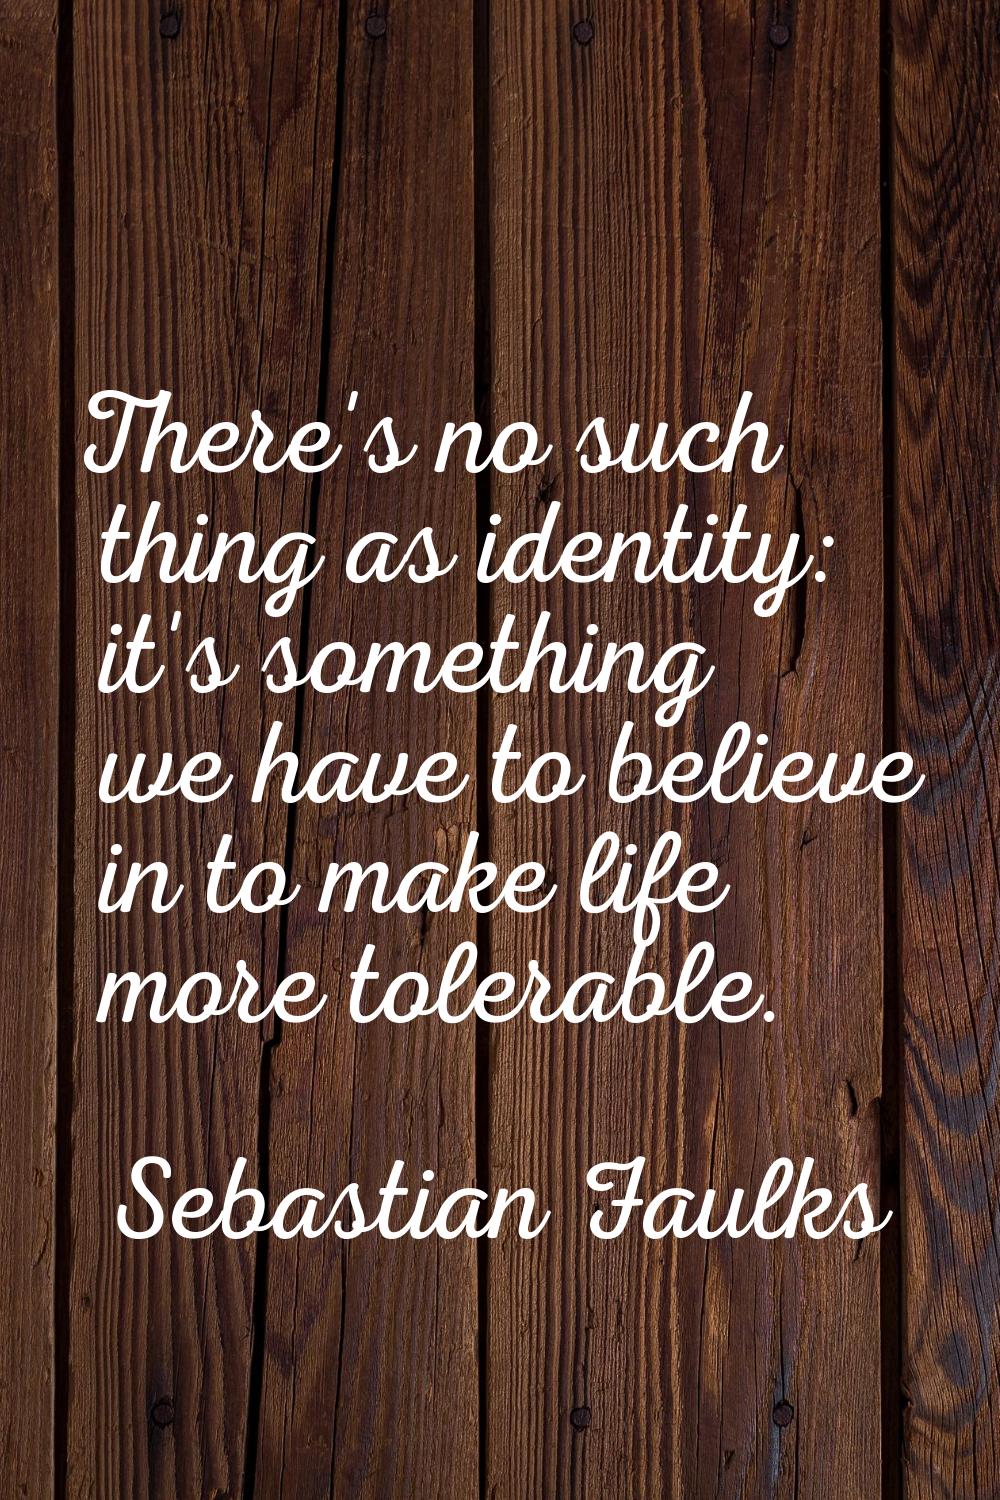 There's no such thing as identity: it's something we have to believe in to make life more tolerable